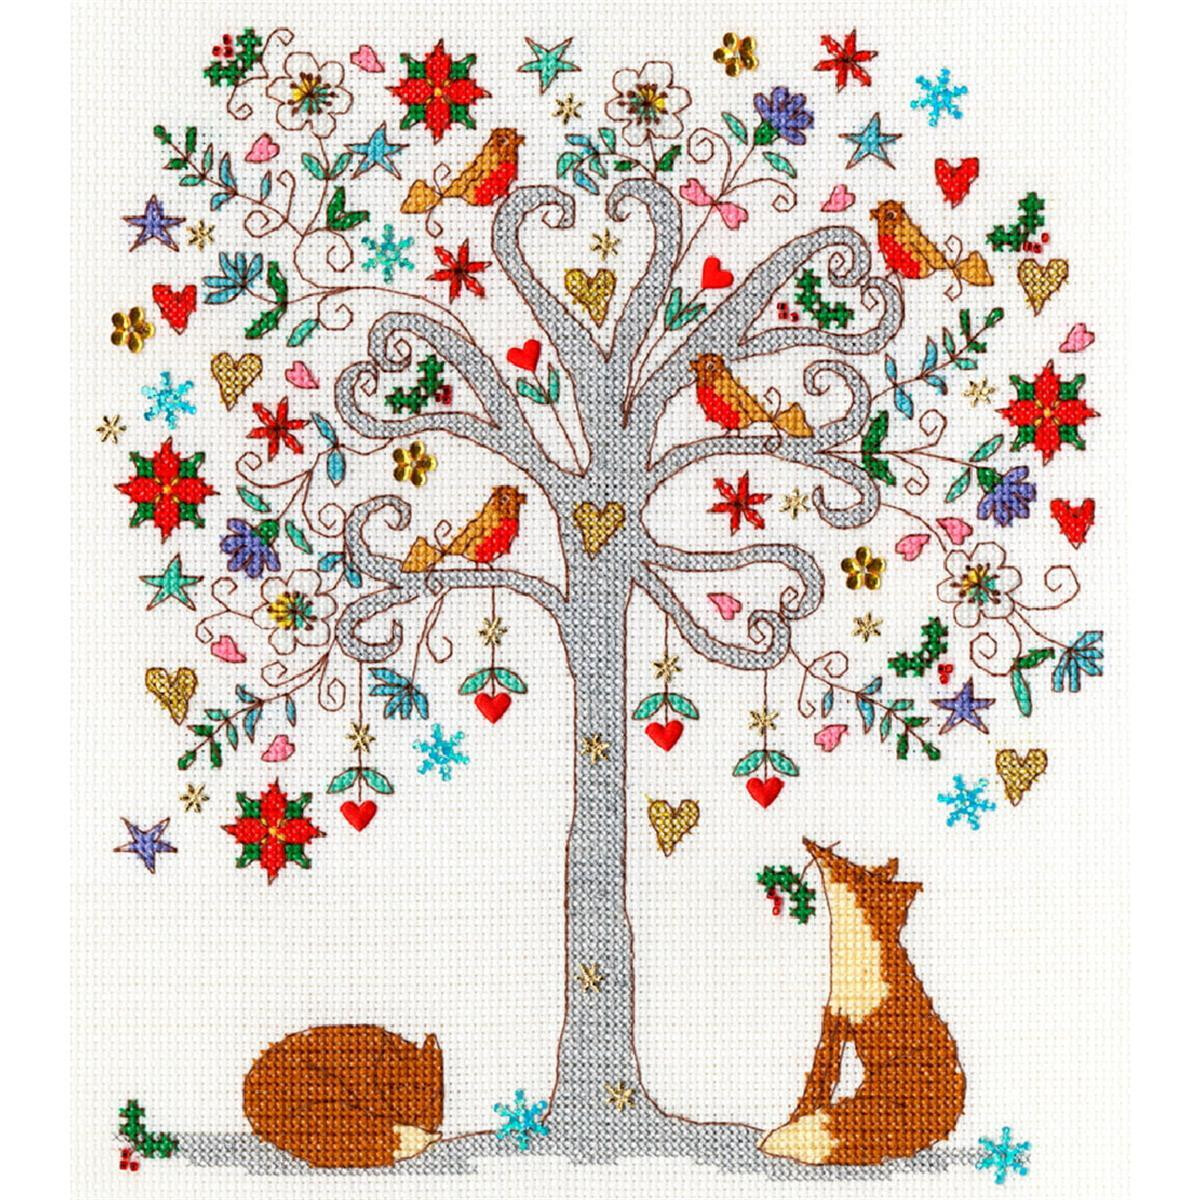 A whimsical embroidered scene of a tree decorated with...